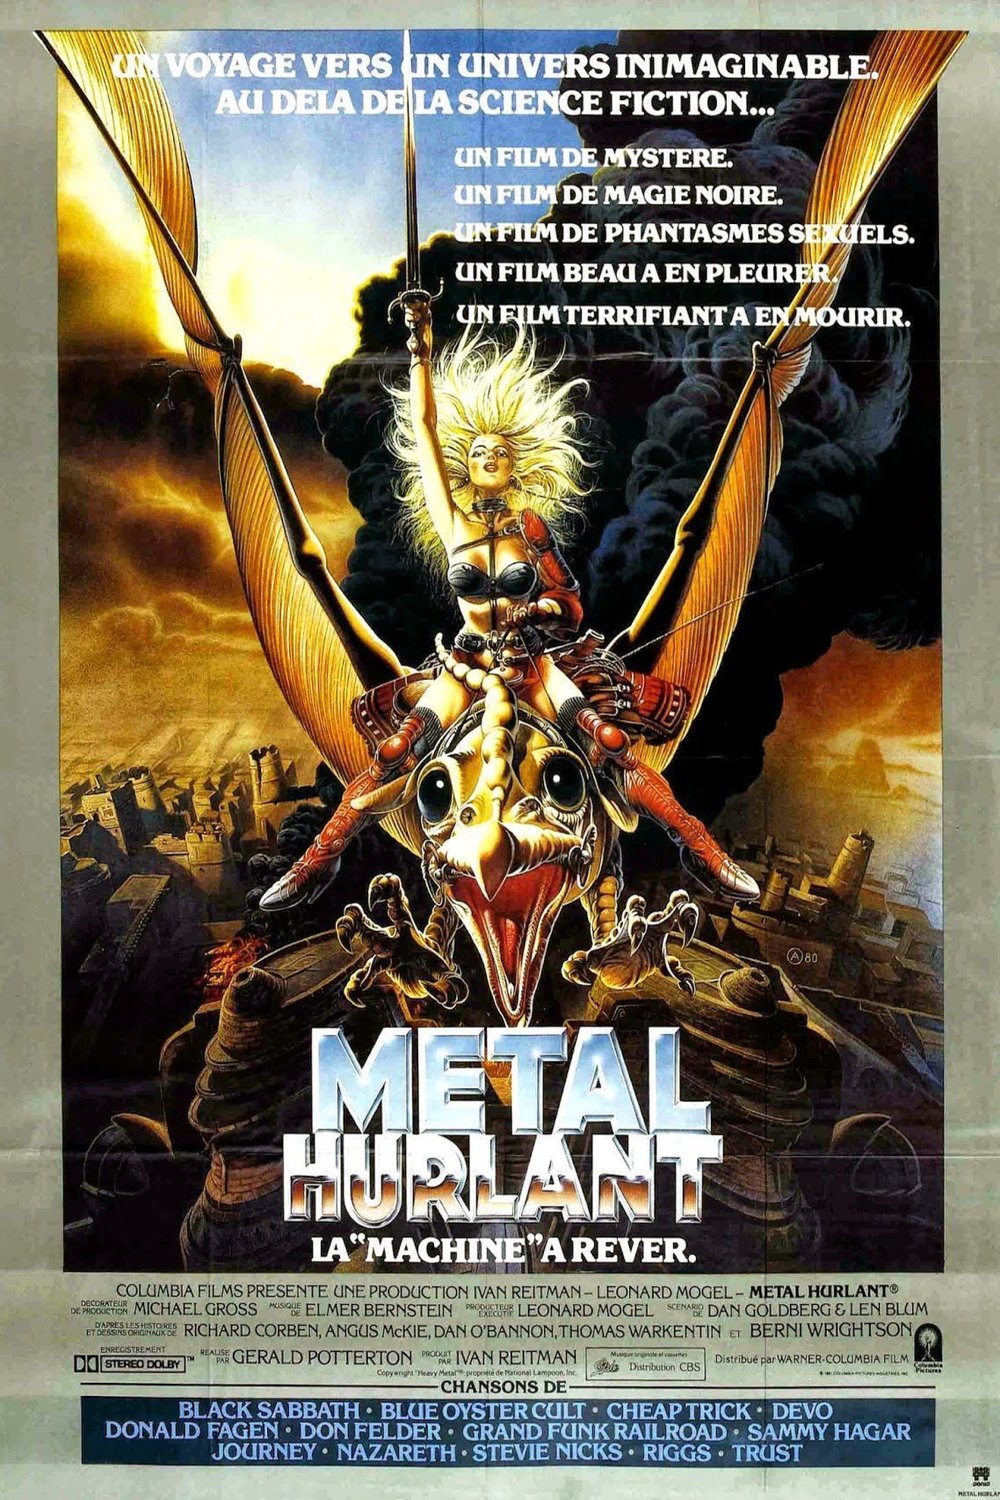 Poster of the movie Métal hurlant